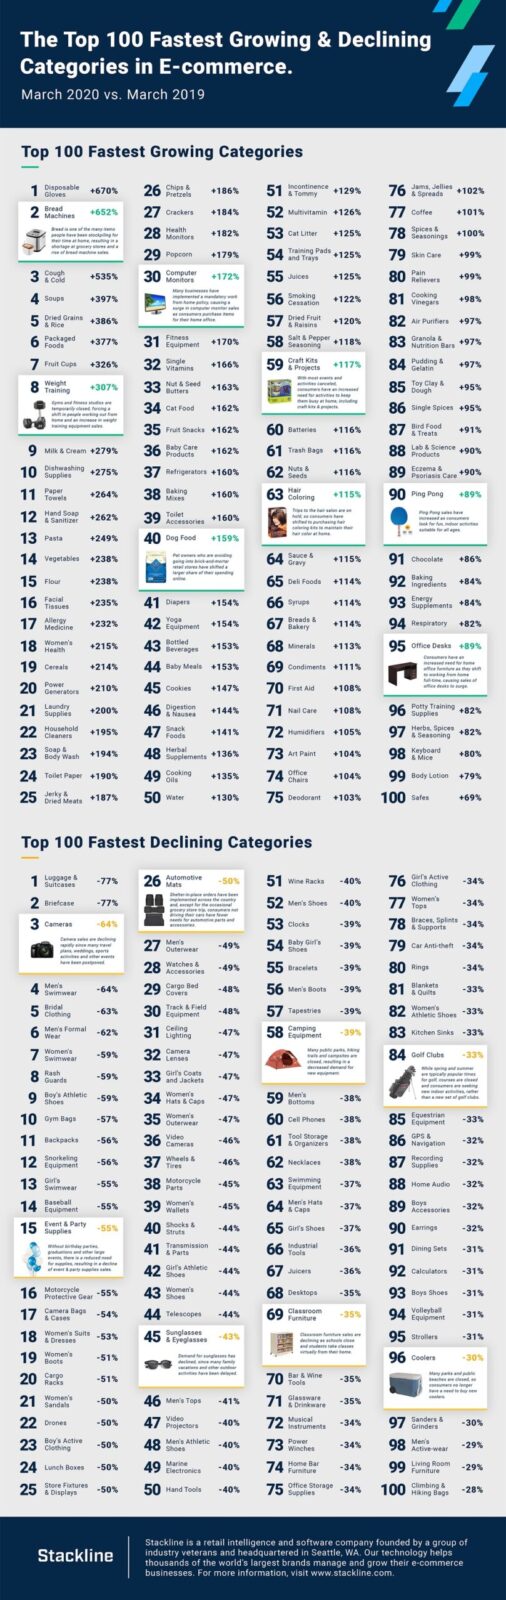 Top 100 Fastest Growing & Declining Categories in E-commerce